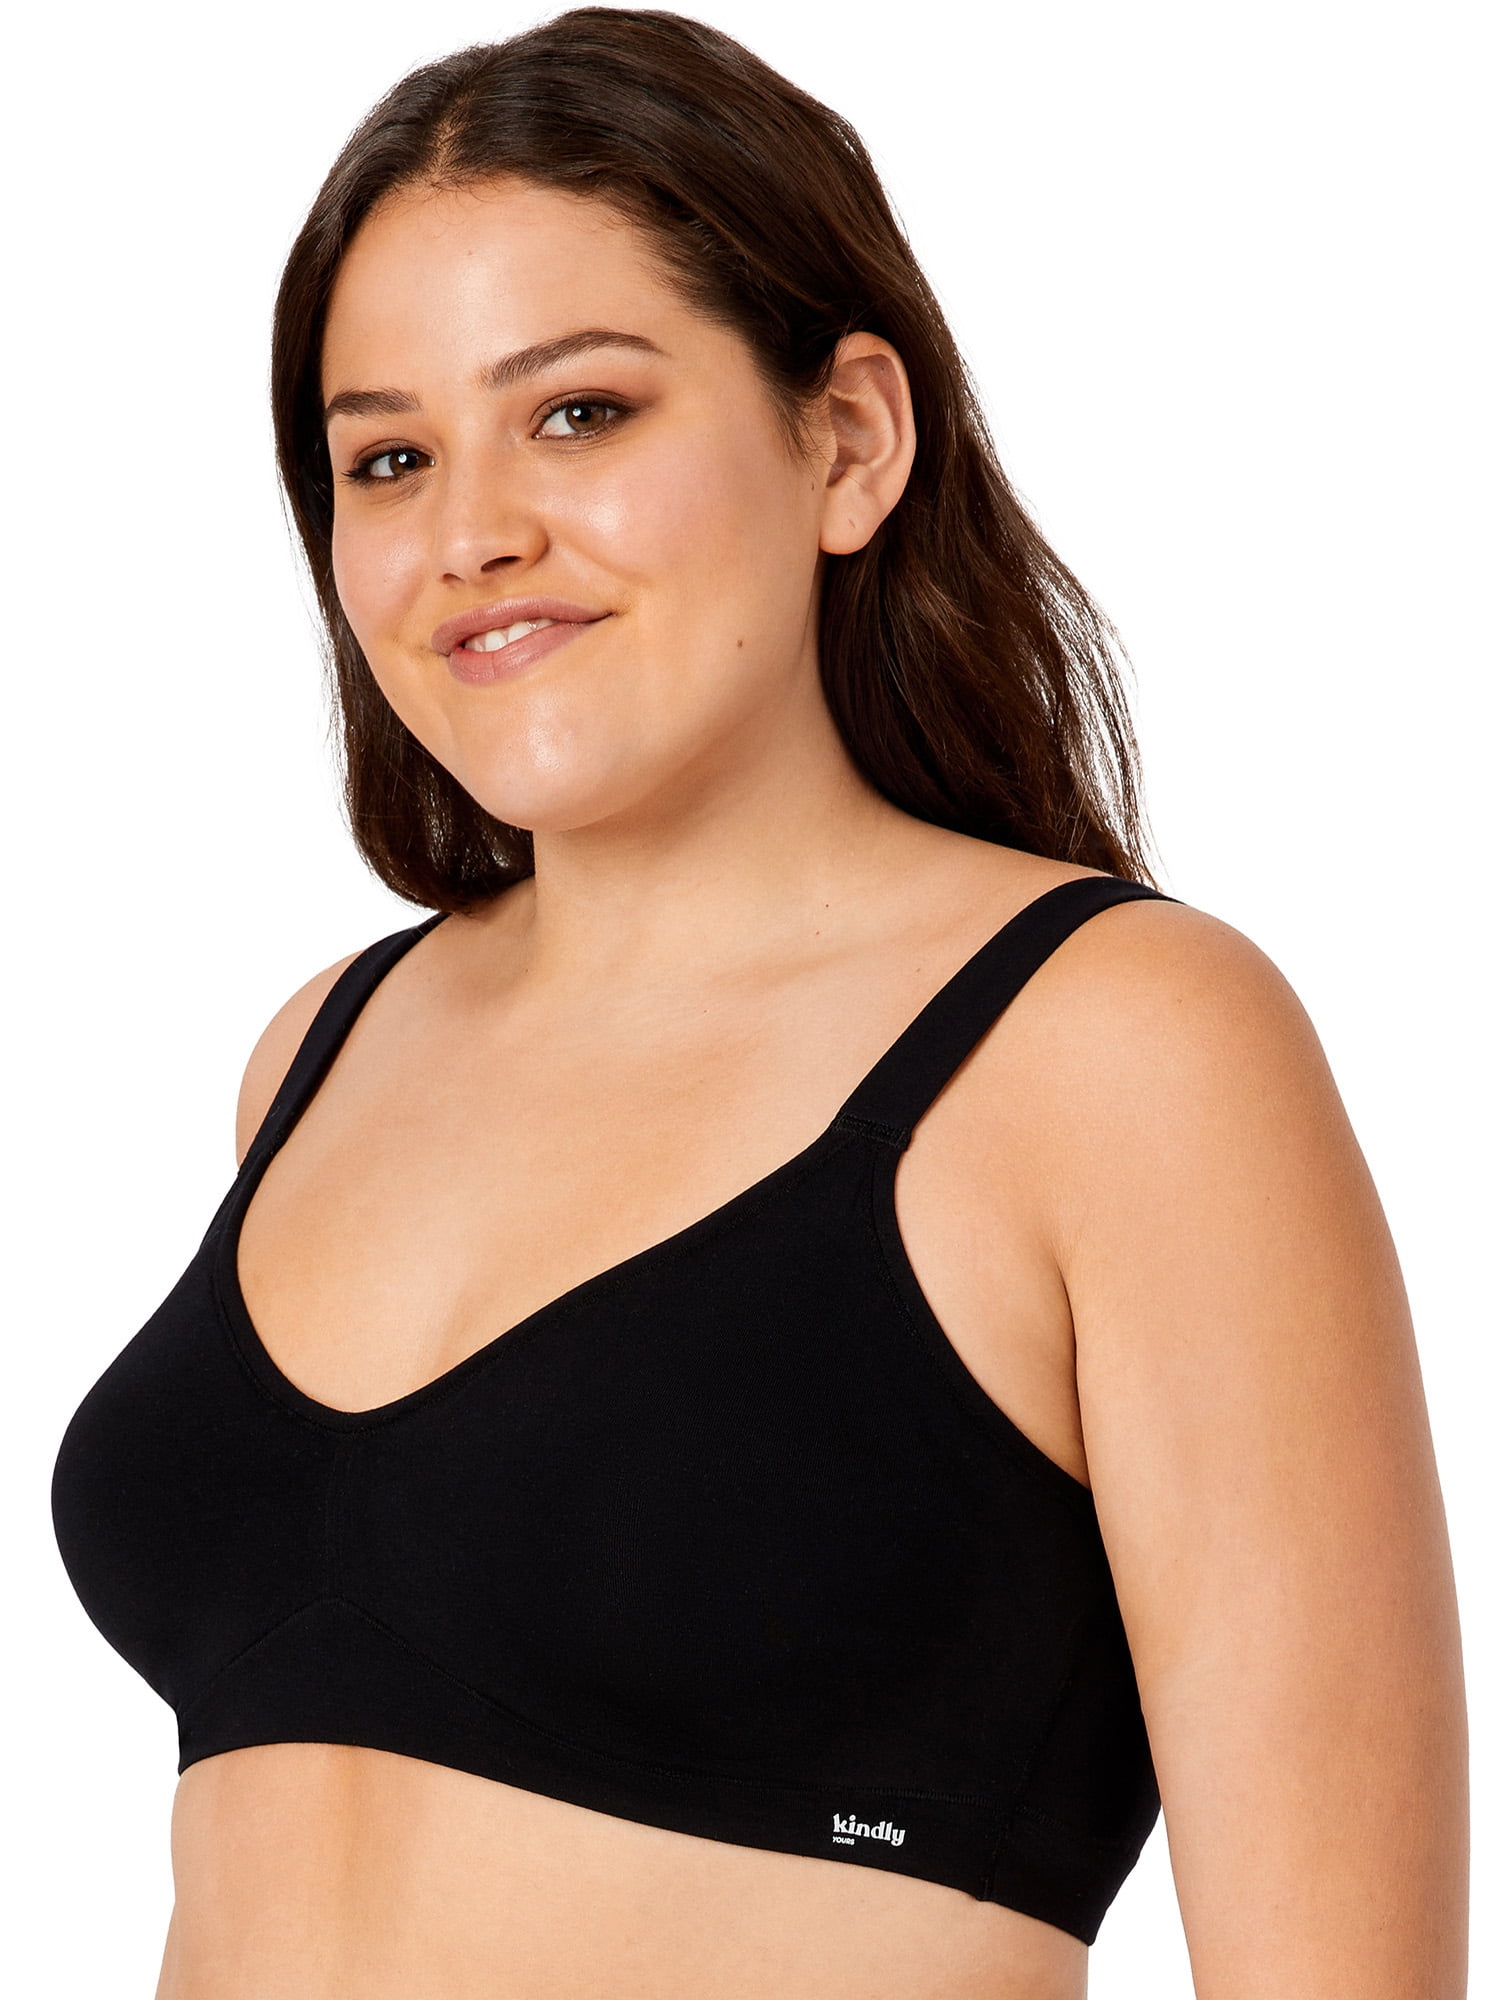 Sizes Kindly S Pullover Lounge Comfort Modal Yours Bra, XXXL to Women\'s